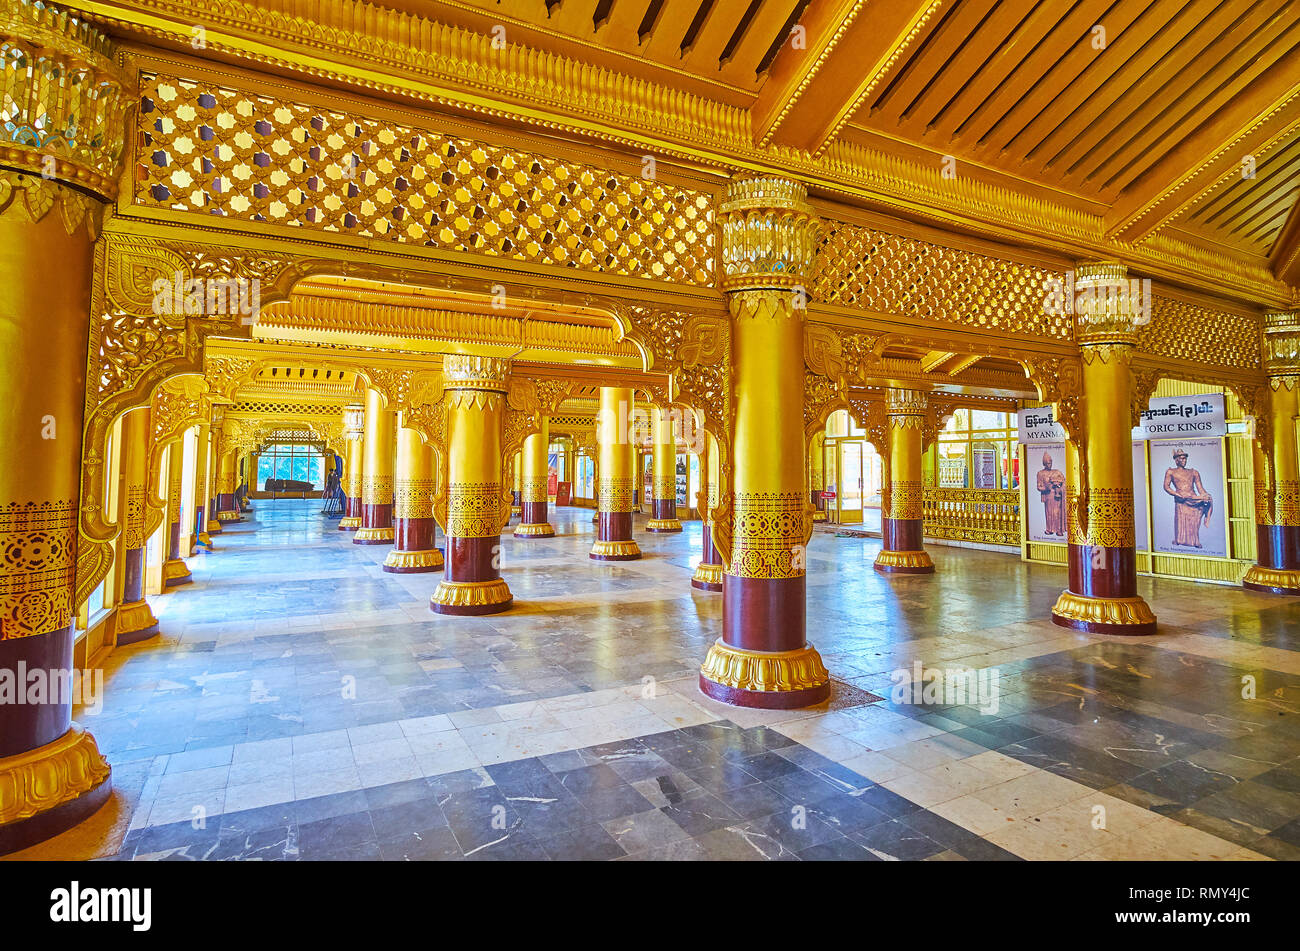 BAGO, MYANMAR - FEBRUARY 15, 2018: Lion Throne Hall of Kanbawzathadi palace with gilded columns, decorated with carvings, painted patterns and fine mi Stock Photo